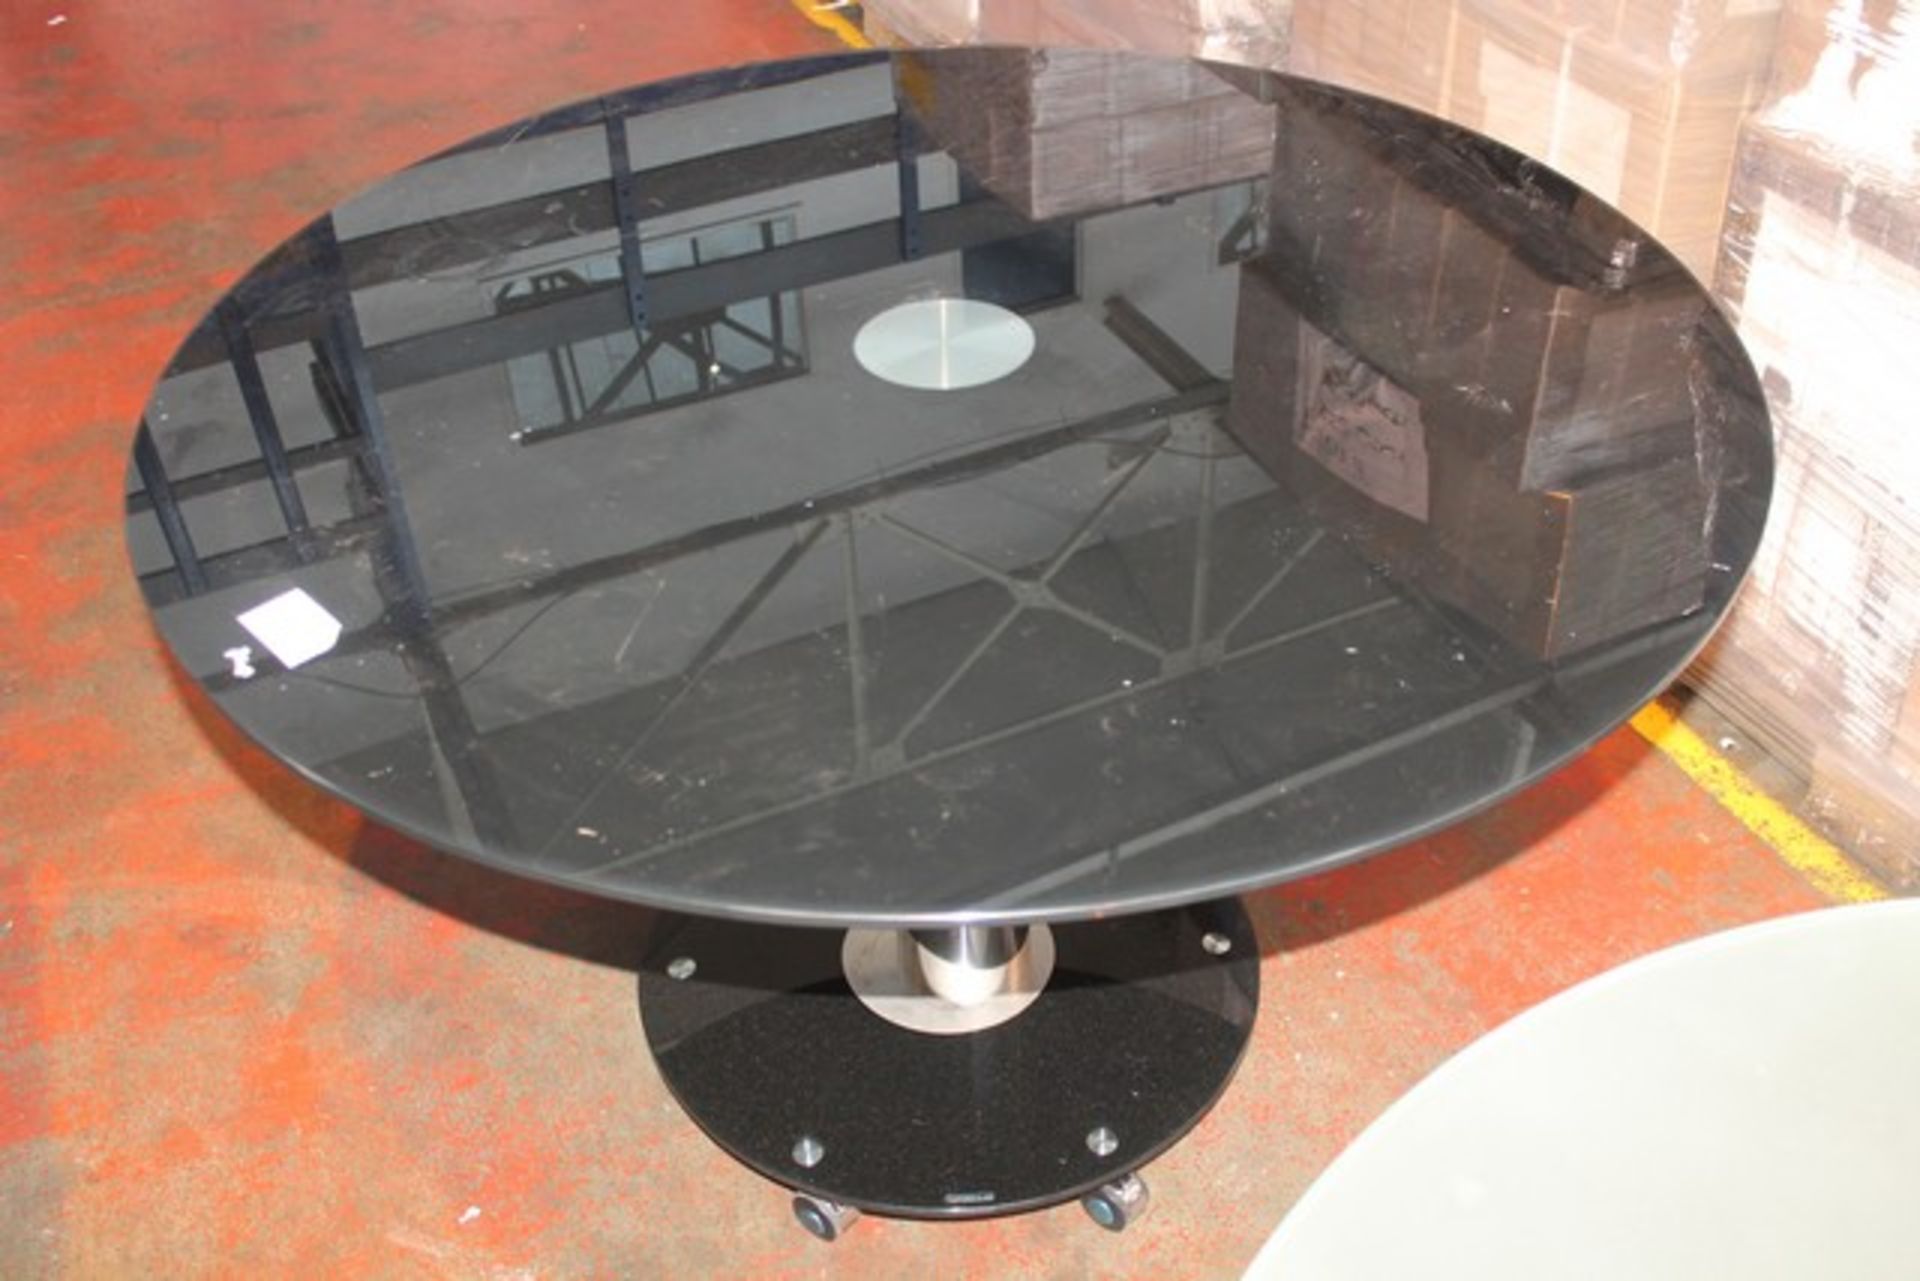 1 x VENICE LARGE 120CM ROUND BLACK GLASS AND CHROME DINING TABLE RRP £320  *PLEASE NOTE THAT THE BID